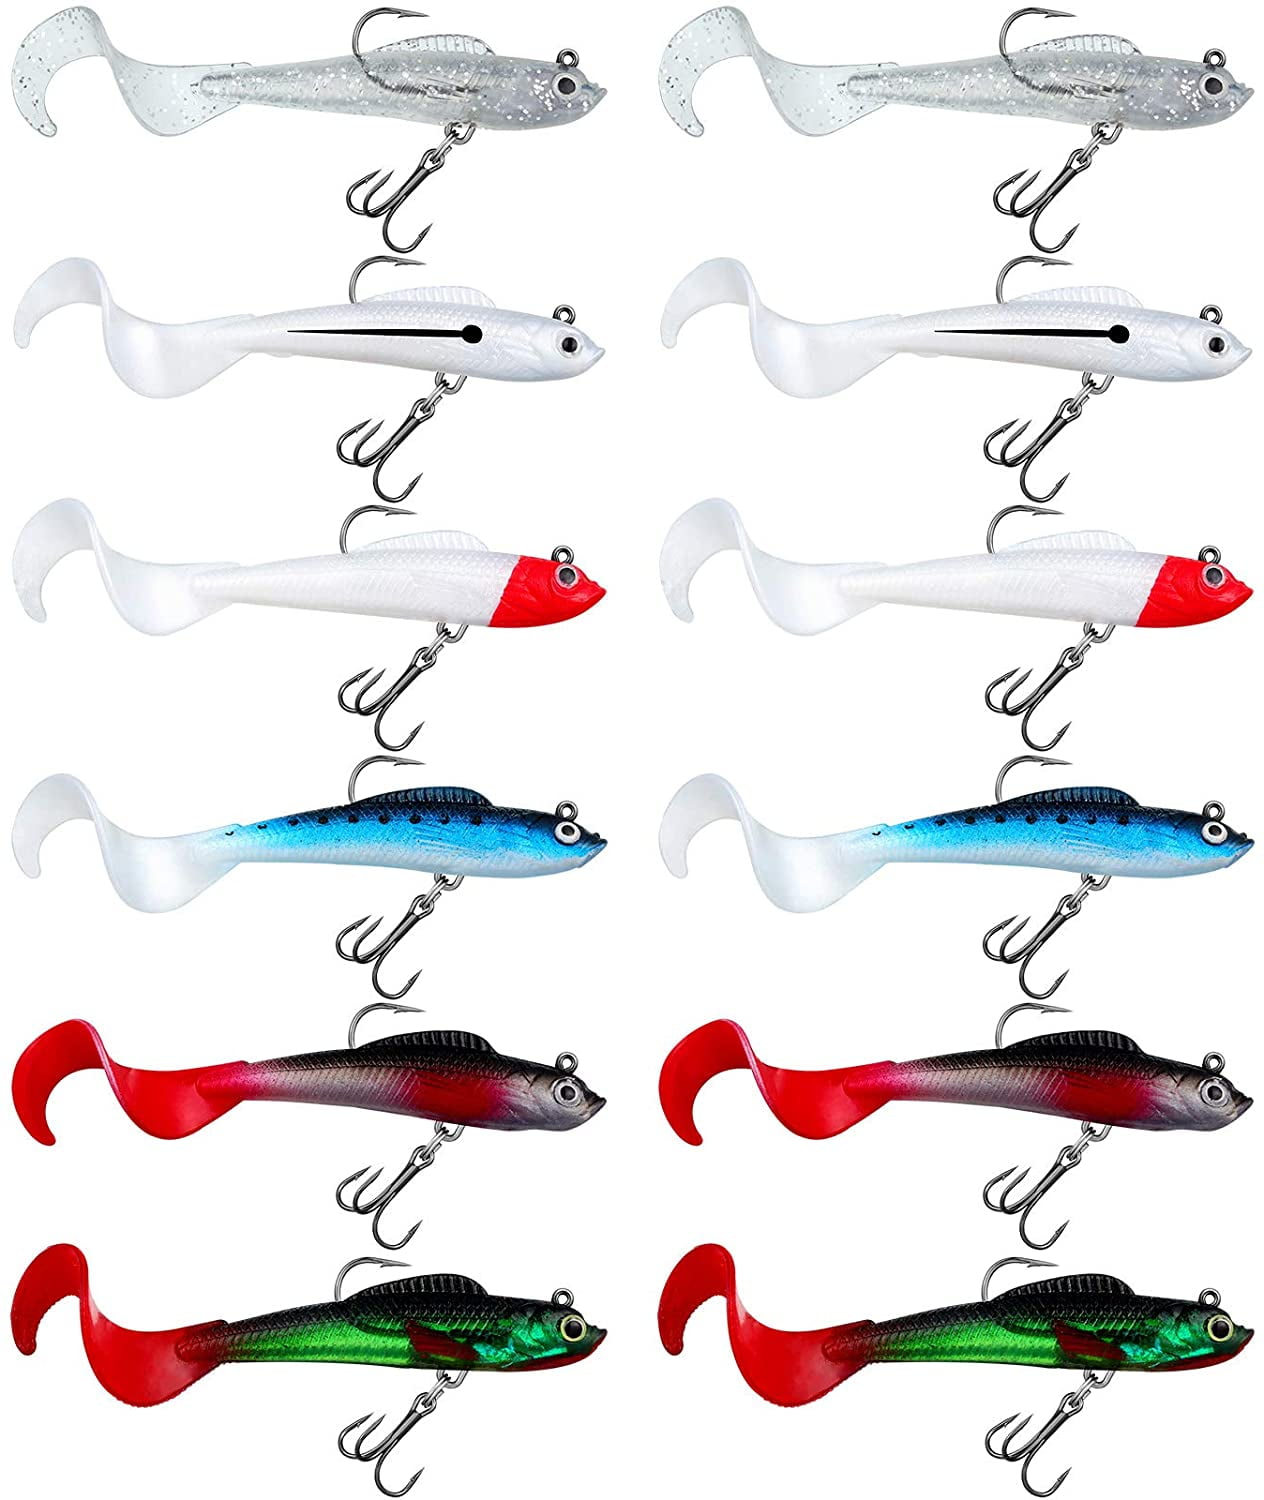 Grub Worm Mixed Soft Plastic Lure Fishing Tackle Bait Jig Head Top A+ 